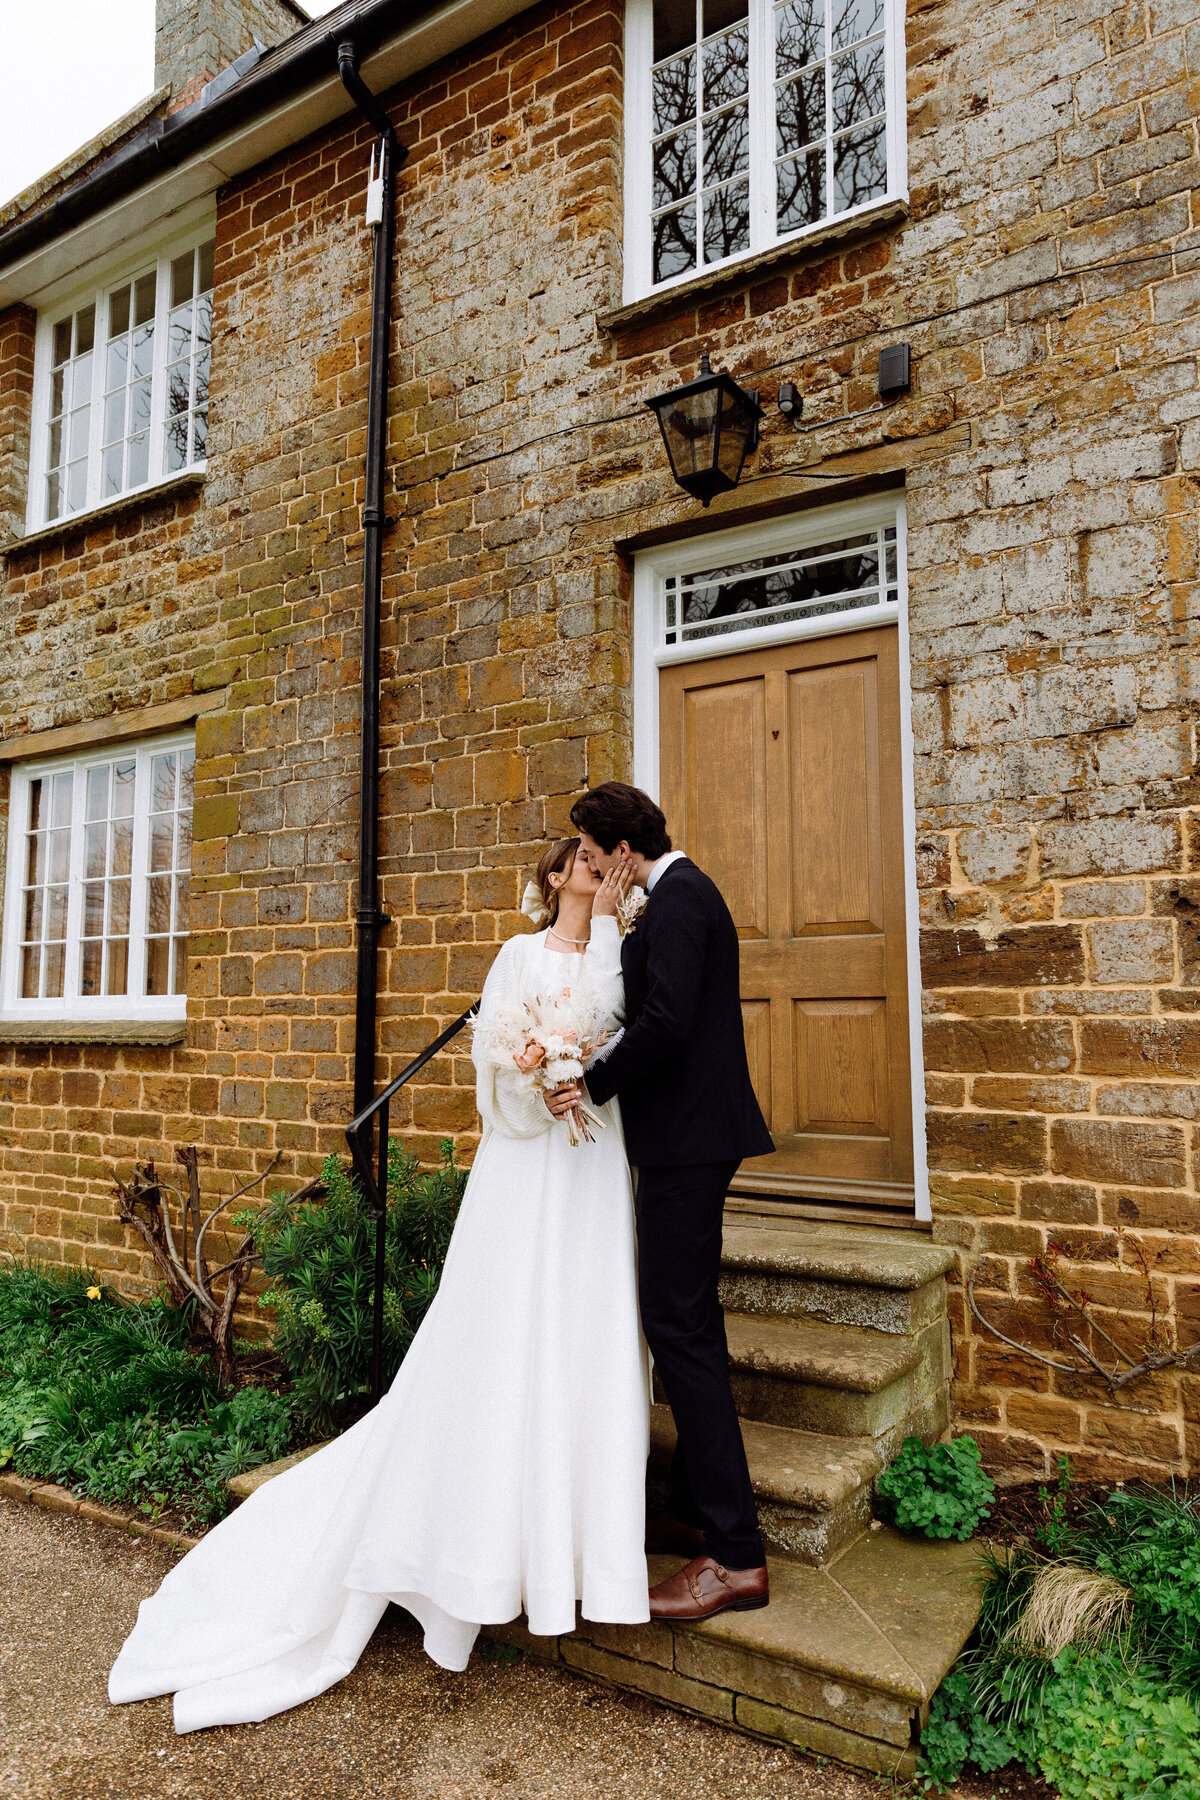 Amy Cutliffe Photography (20)